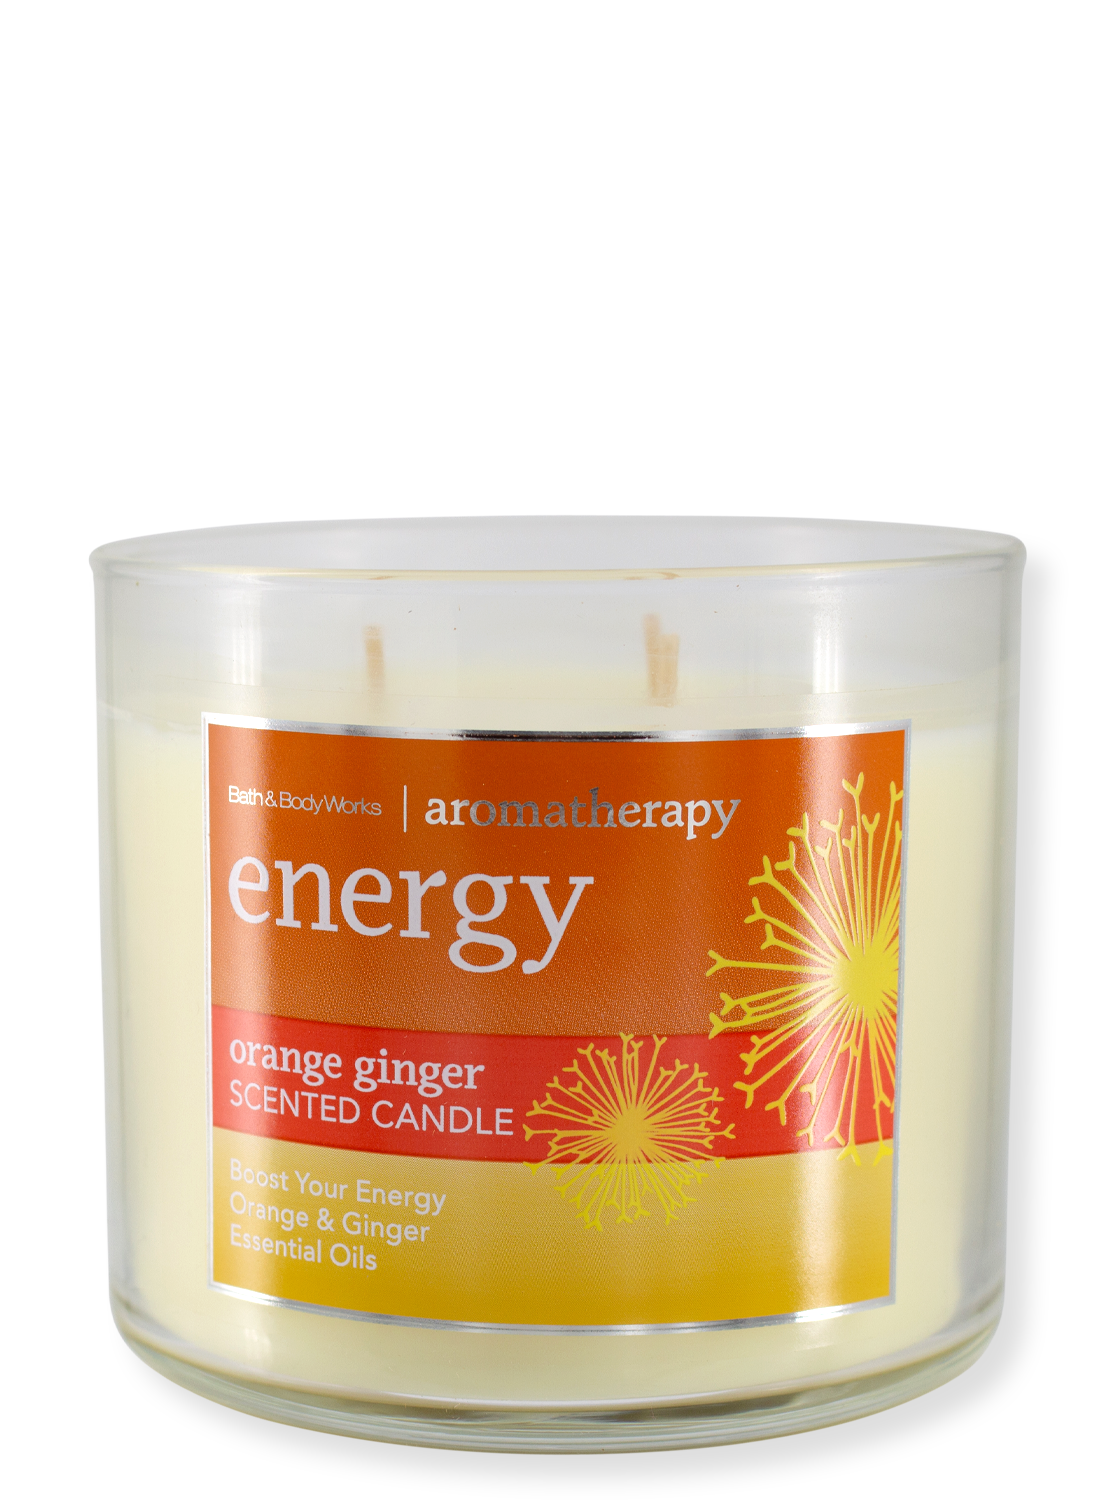 Rarity - aromatherapy - 3 -butt candle - energy - orange ginger - 411g